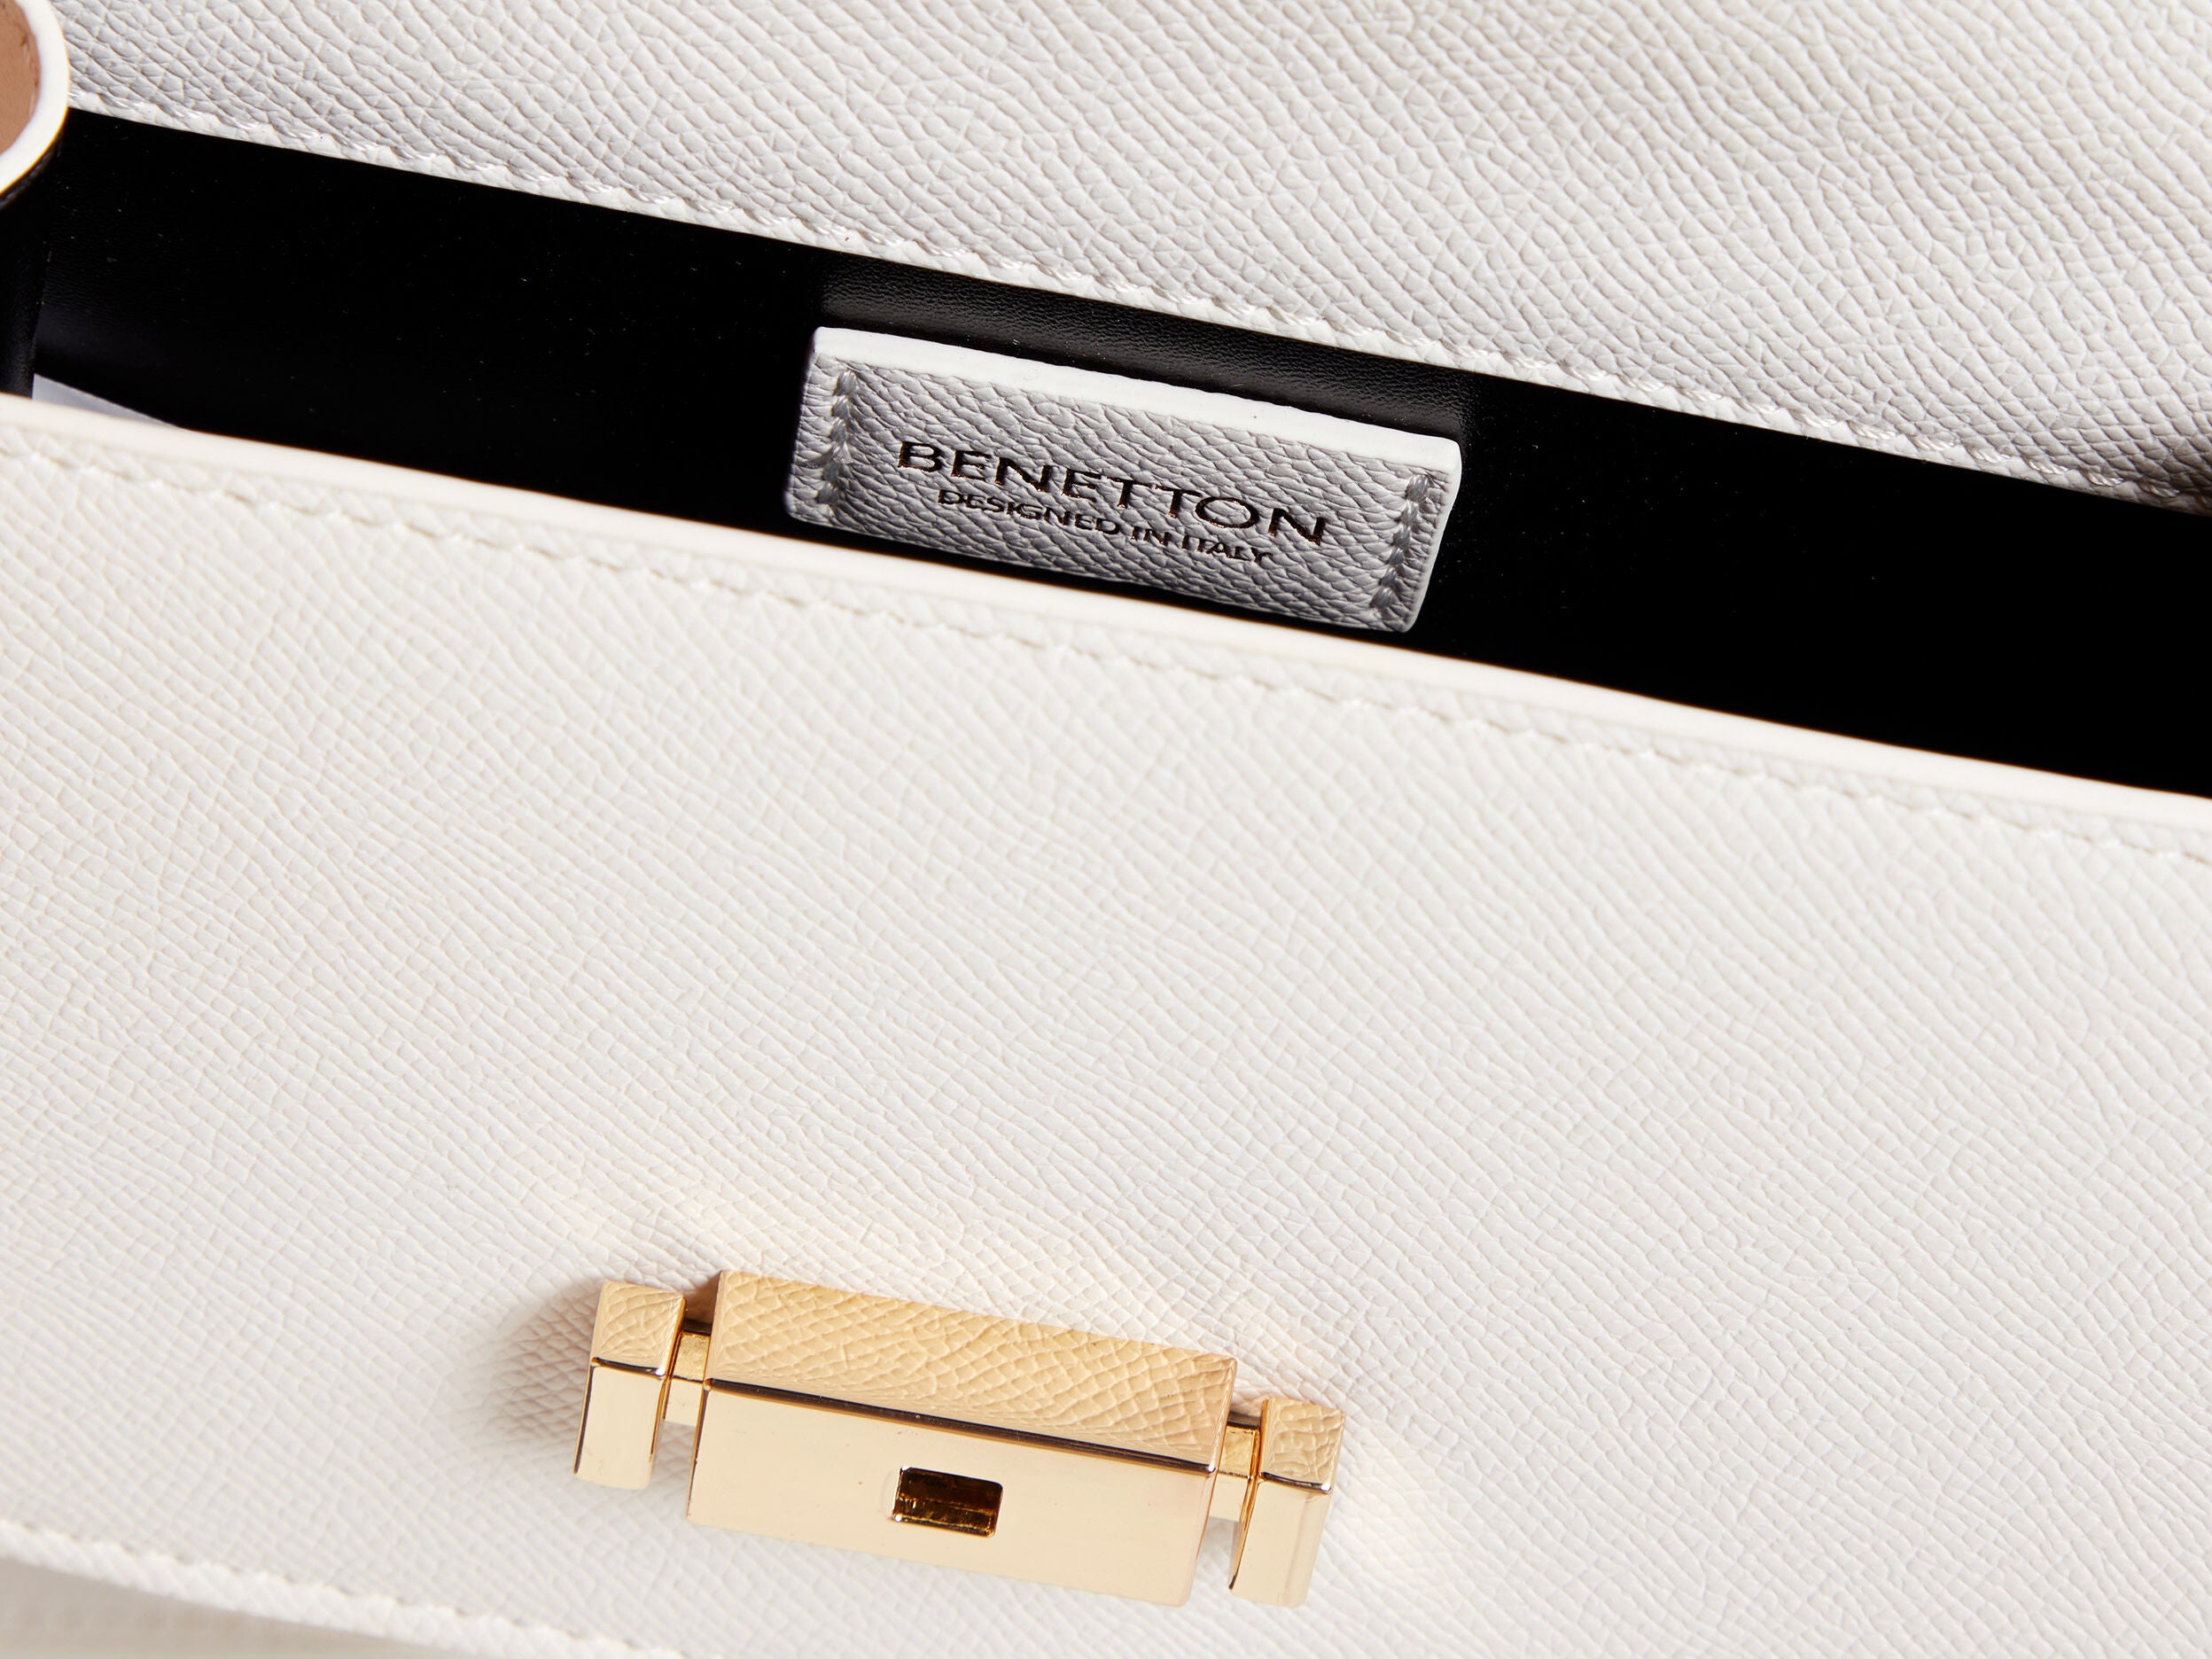 Small Be Bag In White